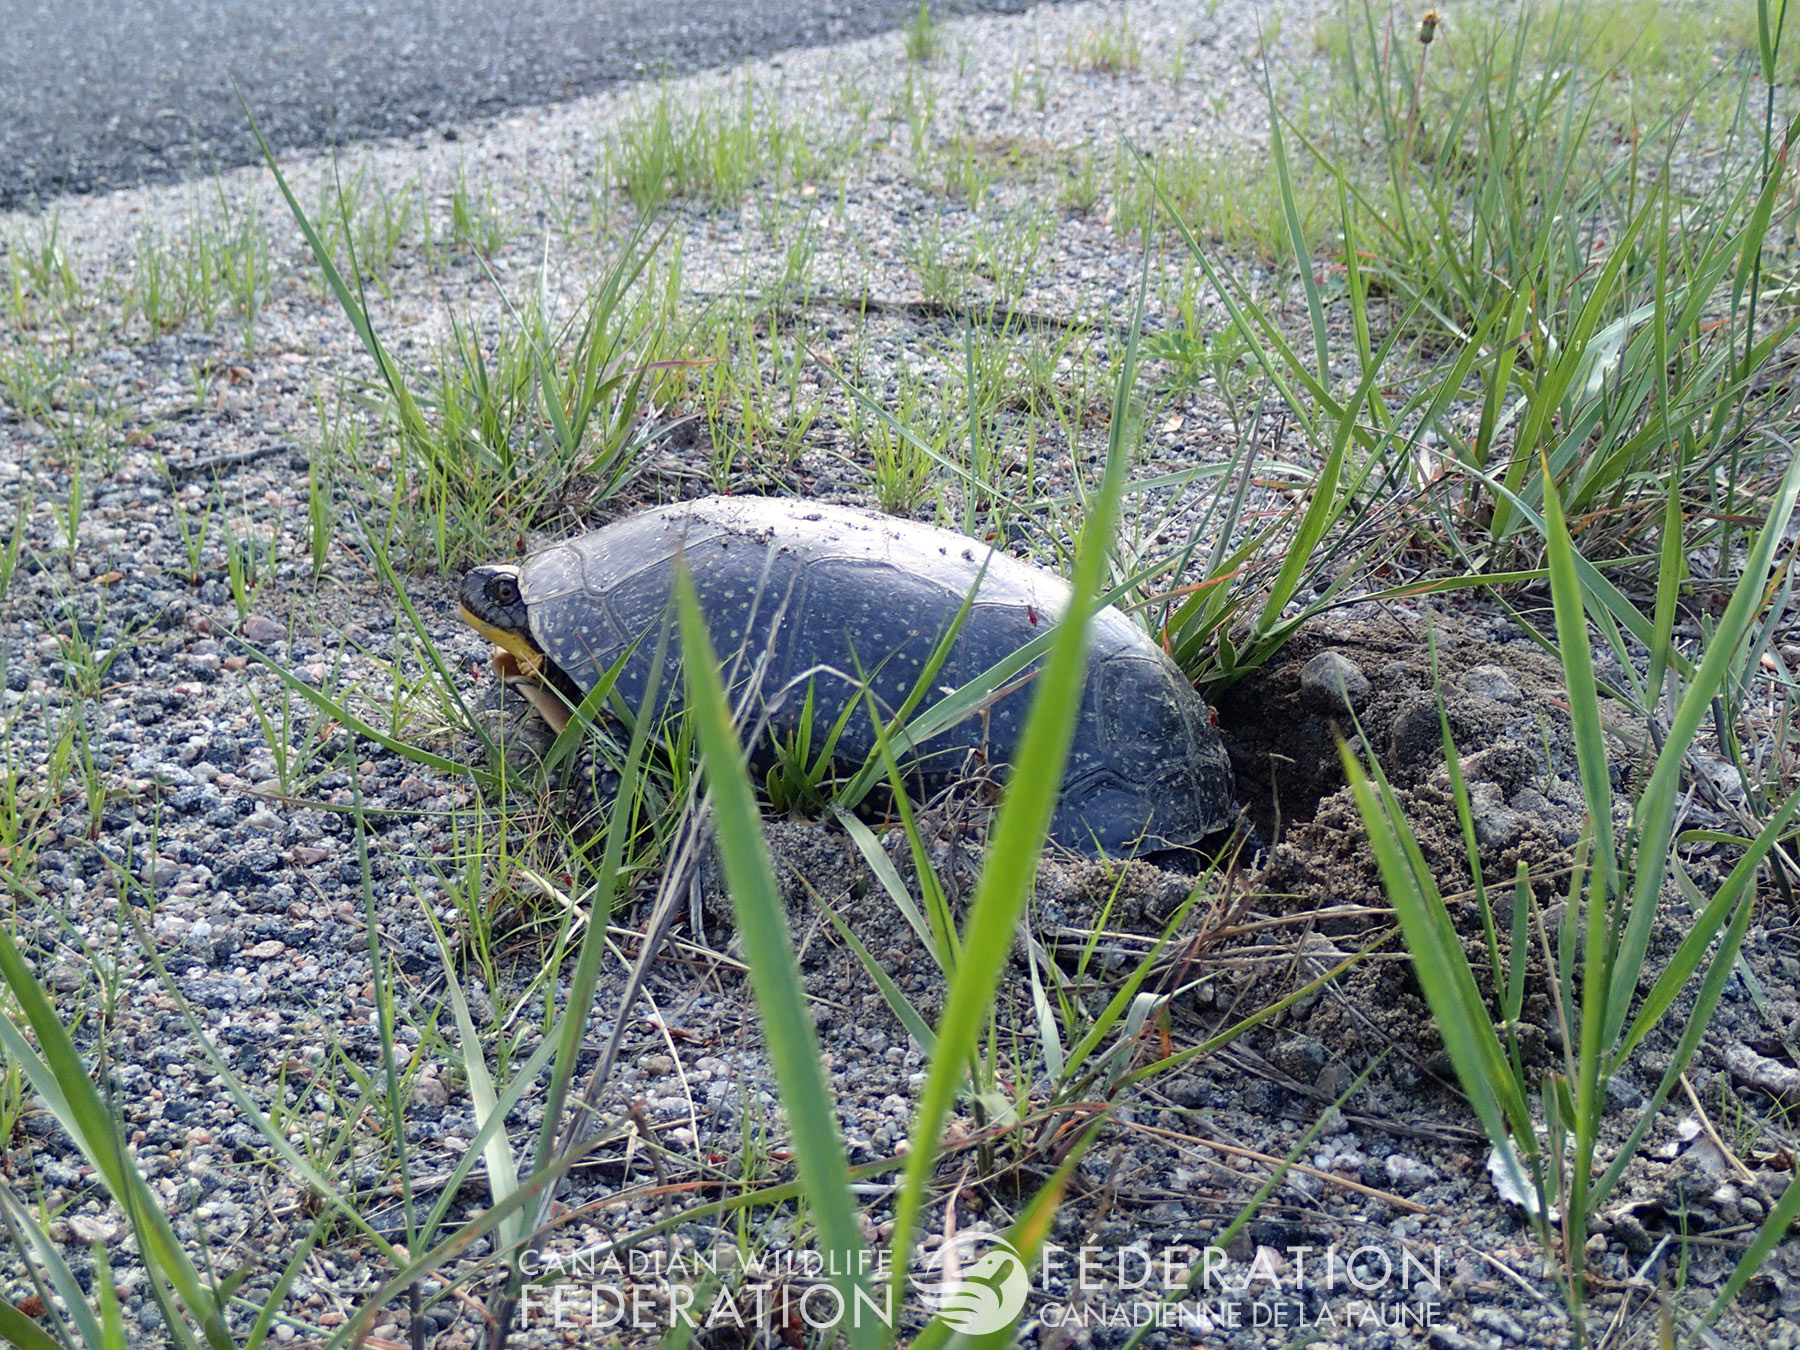 Blanding's Turtle nesting by the road © Hannah McCurdy-Adams